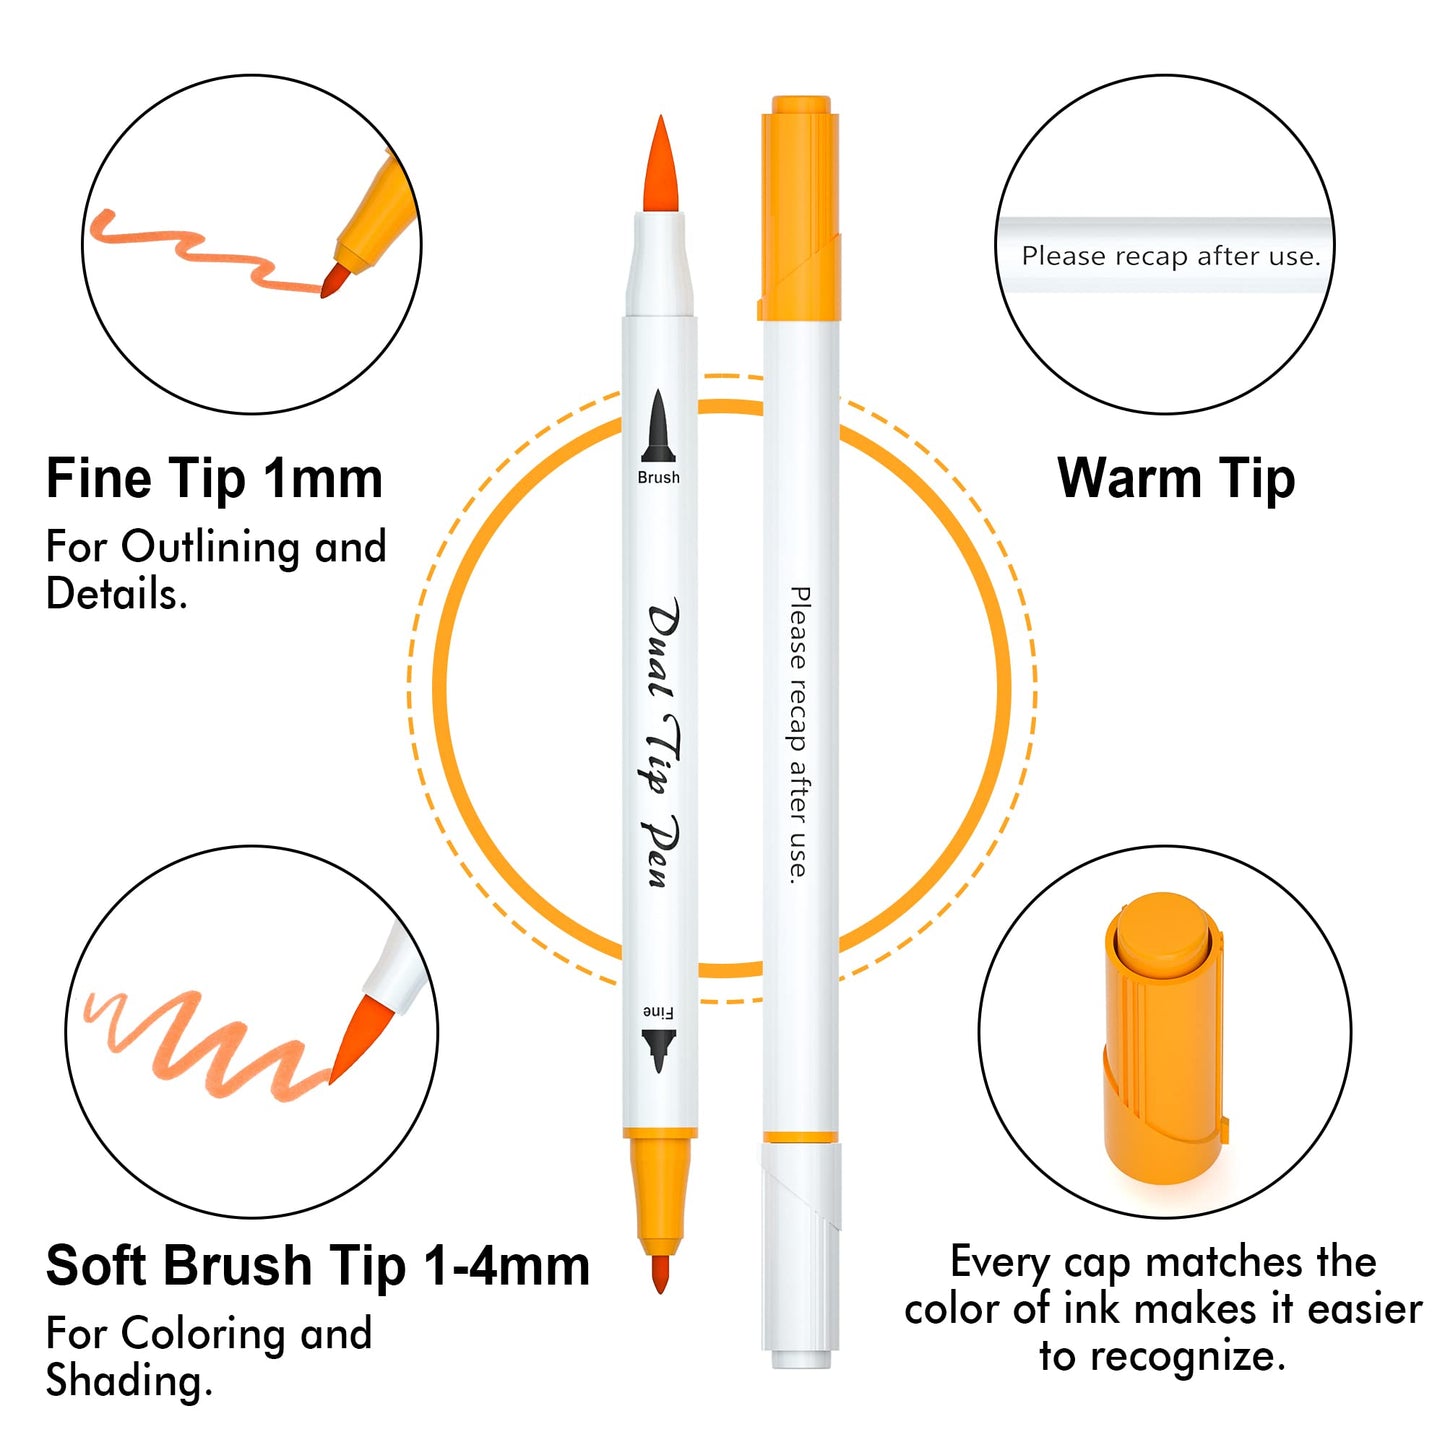 Shuttle Art Dual Tip Brush Pens Art Markers, 70 Colors Fine and Brush Dual Tip Markers Set in Portable Case with 1 Coloring Book for Kids Adult